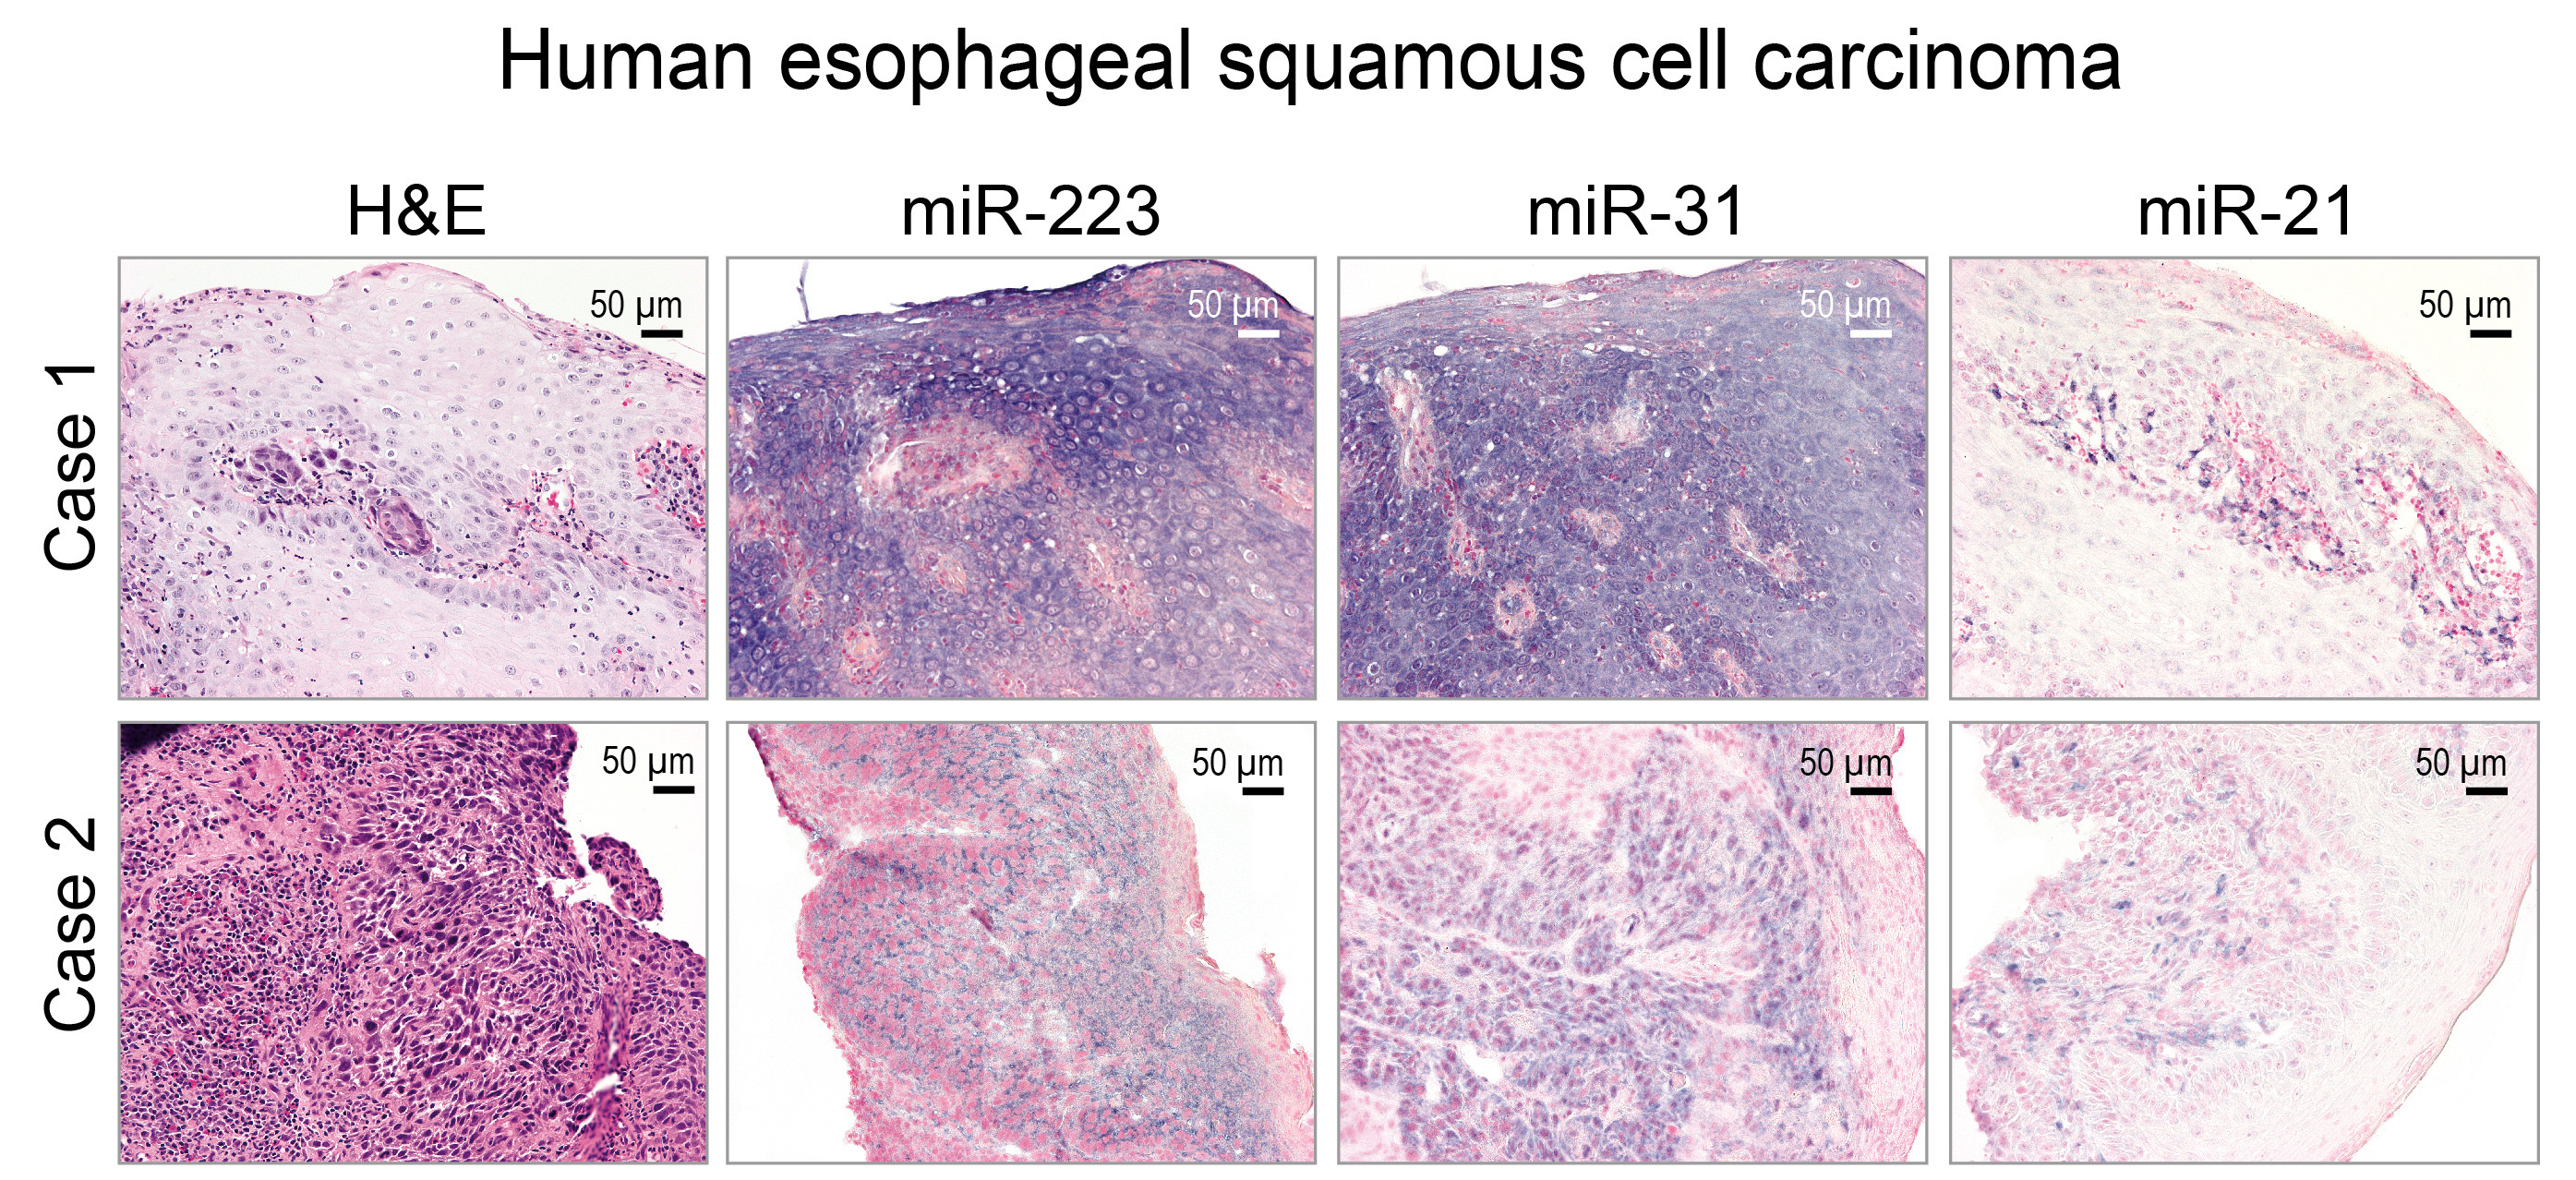 Localization of miR-223, miR-31, and miR-21 in human esophageal squamous cell carcinoma (ESCC) tissue by in situ hybridization (ISH).